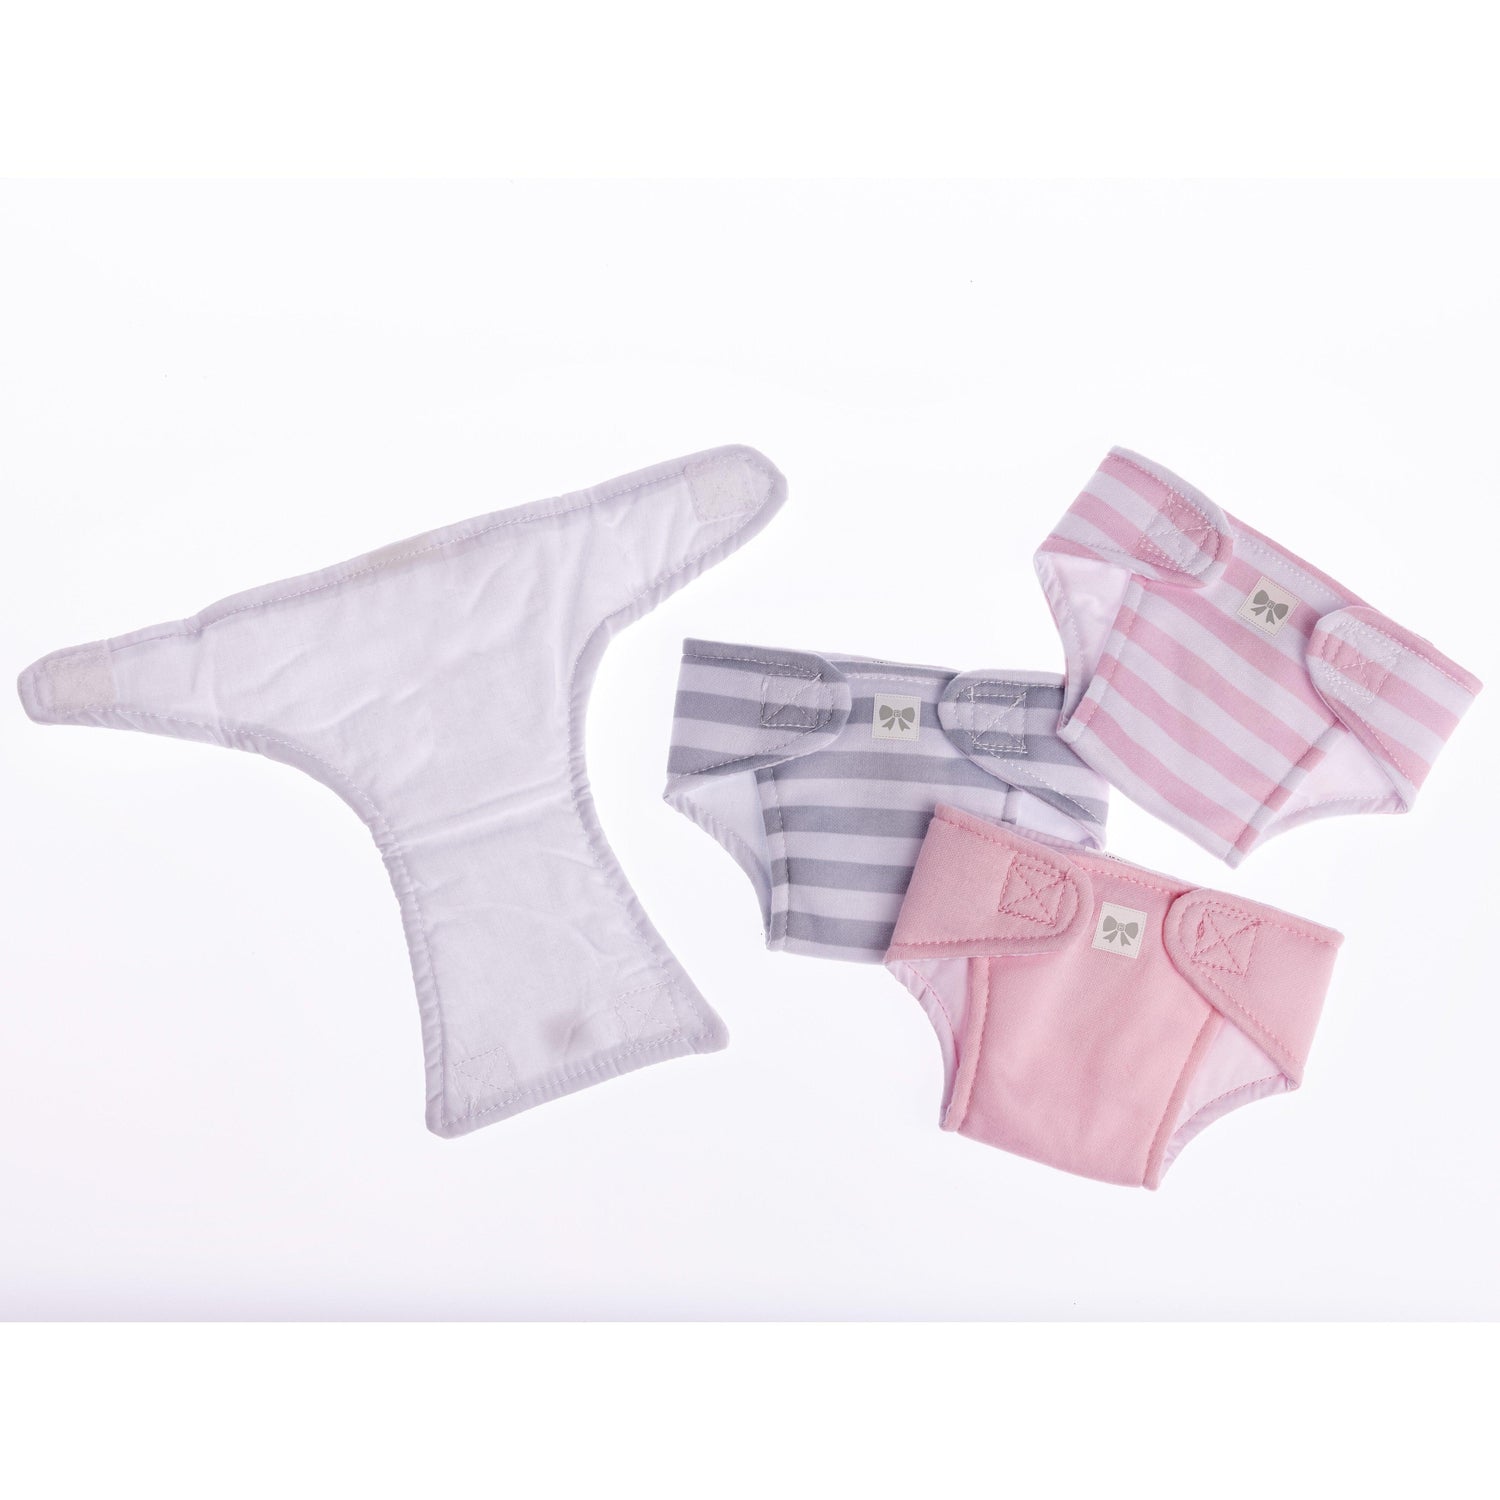 Baby Doll Eco Diapers 4 Pack Fits dolls 14 to 18 inch in Pink